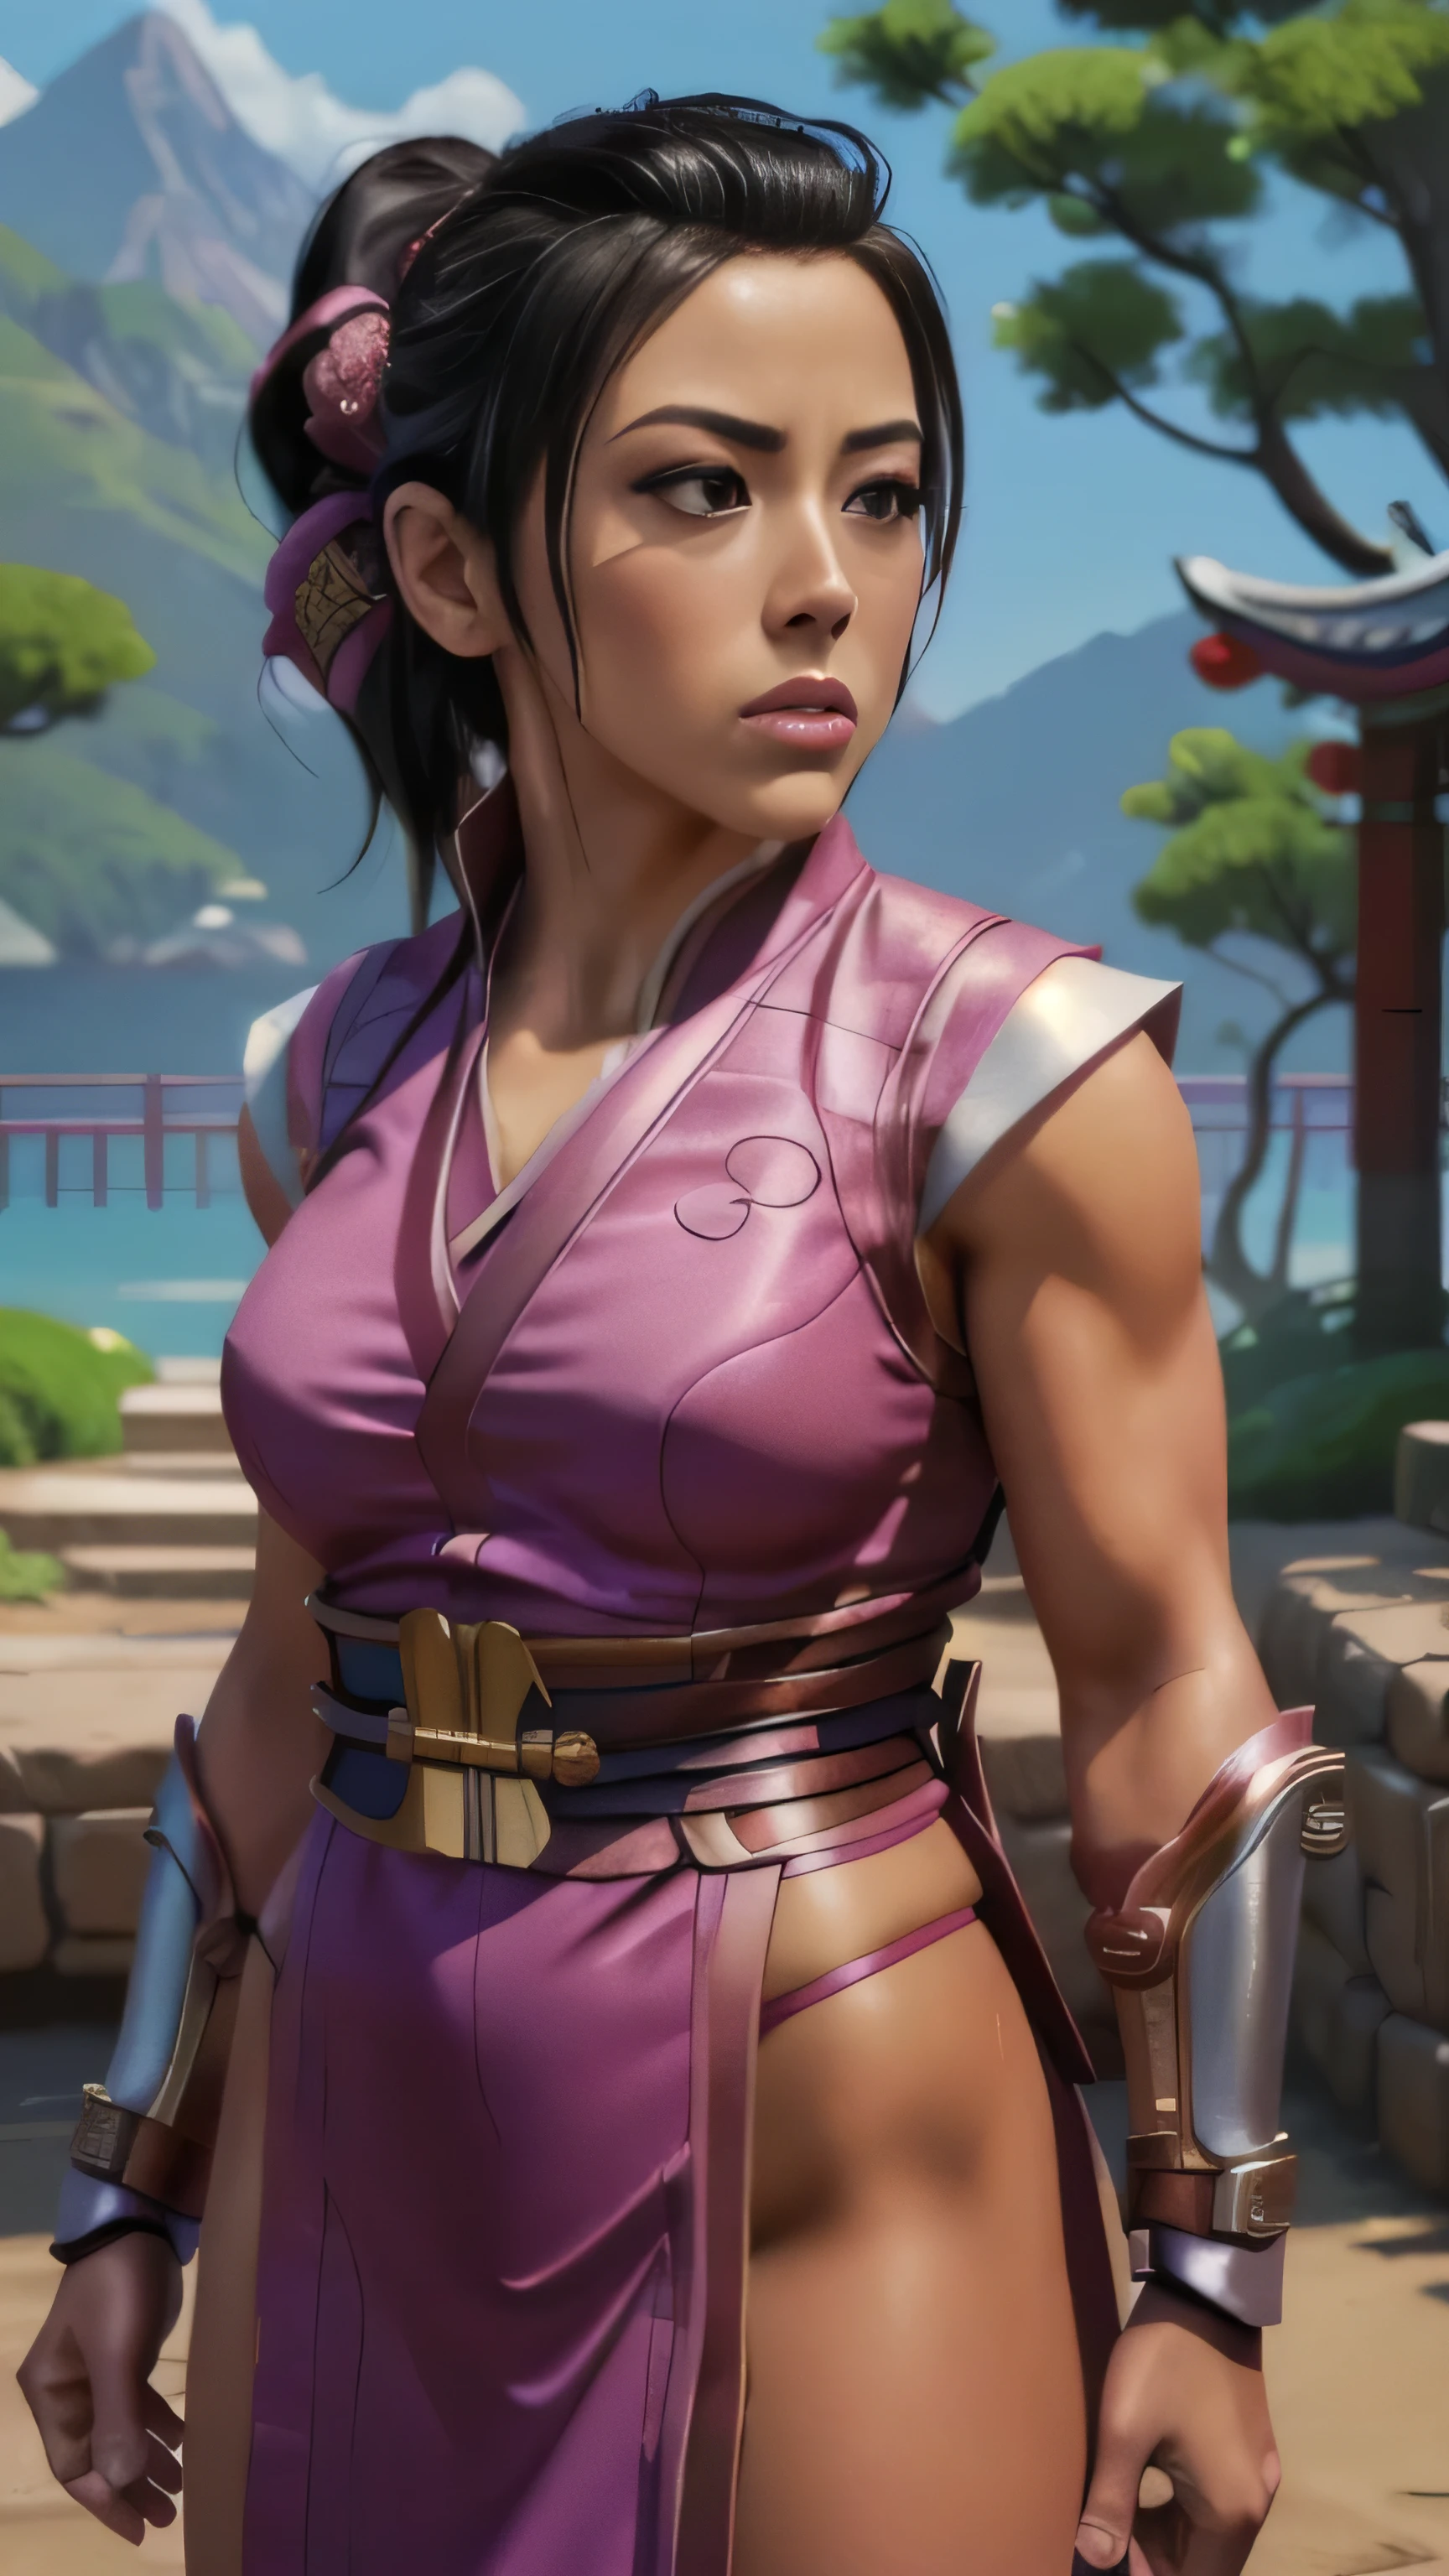 ((Chloe Bennet)) as Li Mei from Mortal Kombat, form-fitting light pink ninja outfit, sash, wrist guards, intricate Chinese culture patterns, hair tied back in a ponytail braid, hair ribbons, 1woman, solo, full body view, ((front view)), intricate, high detail, sharp focus, dramatic, photorealistic painting art by greg rutkowski